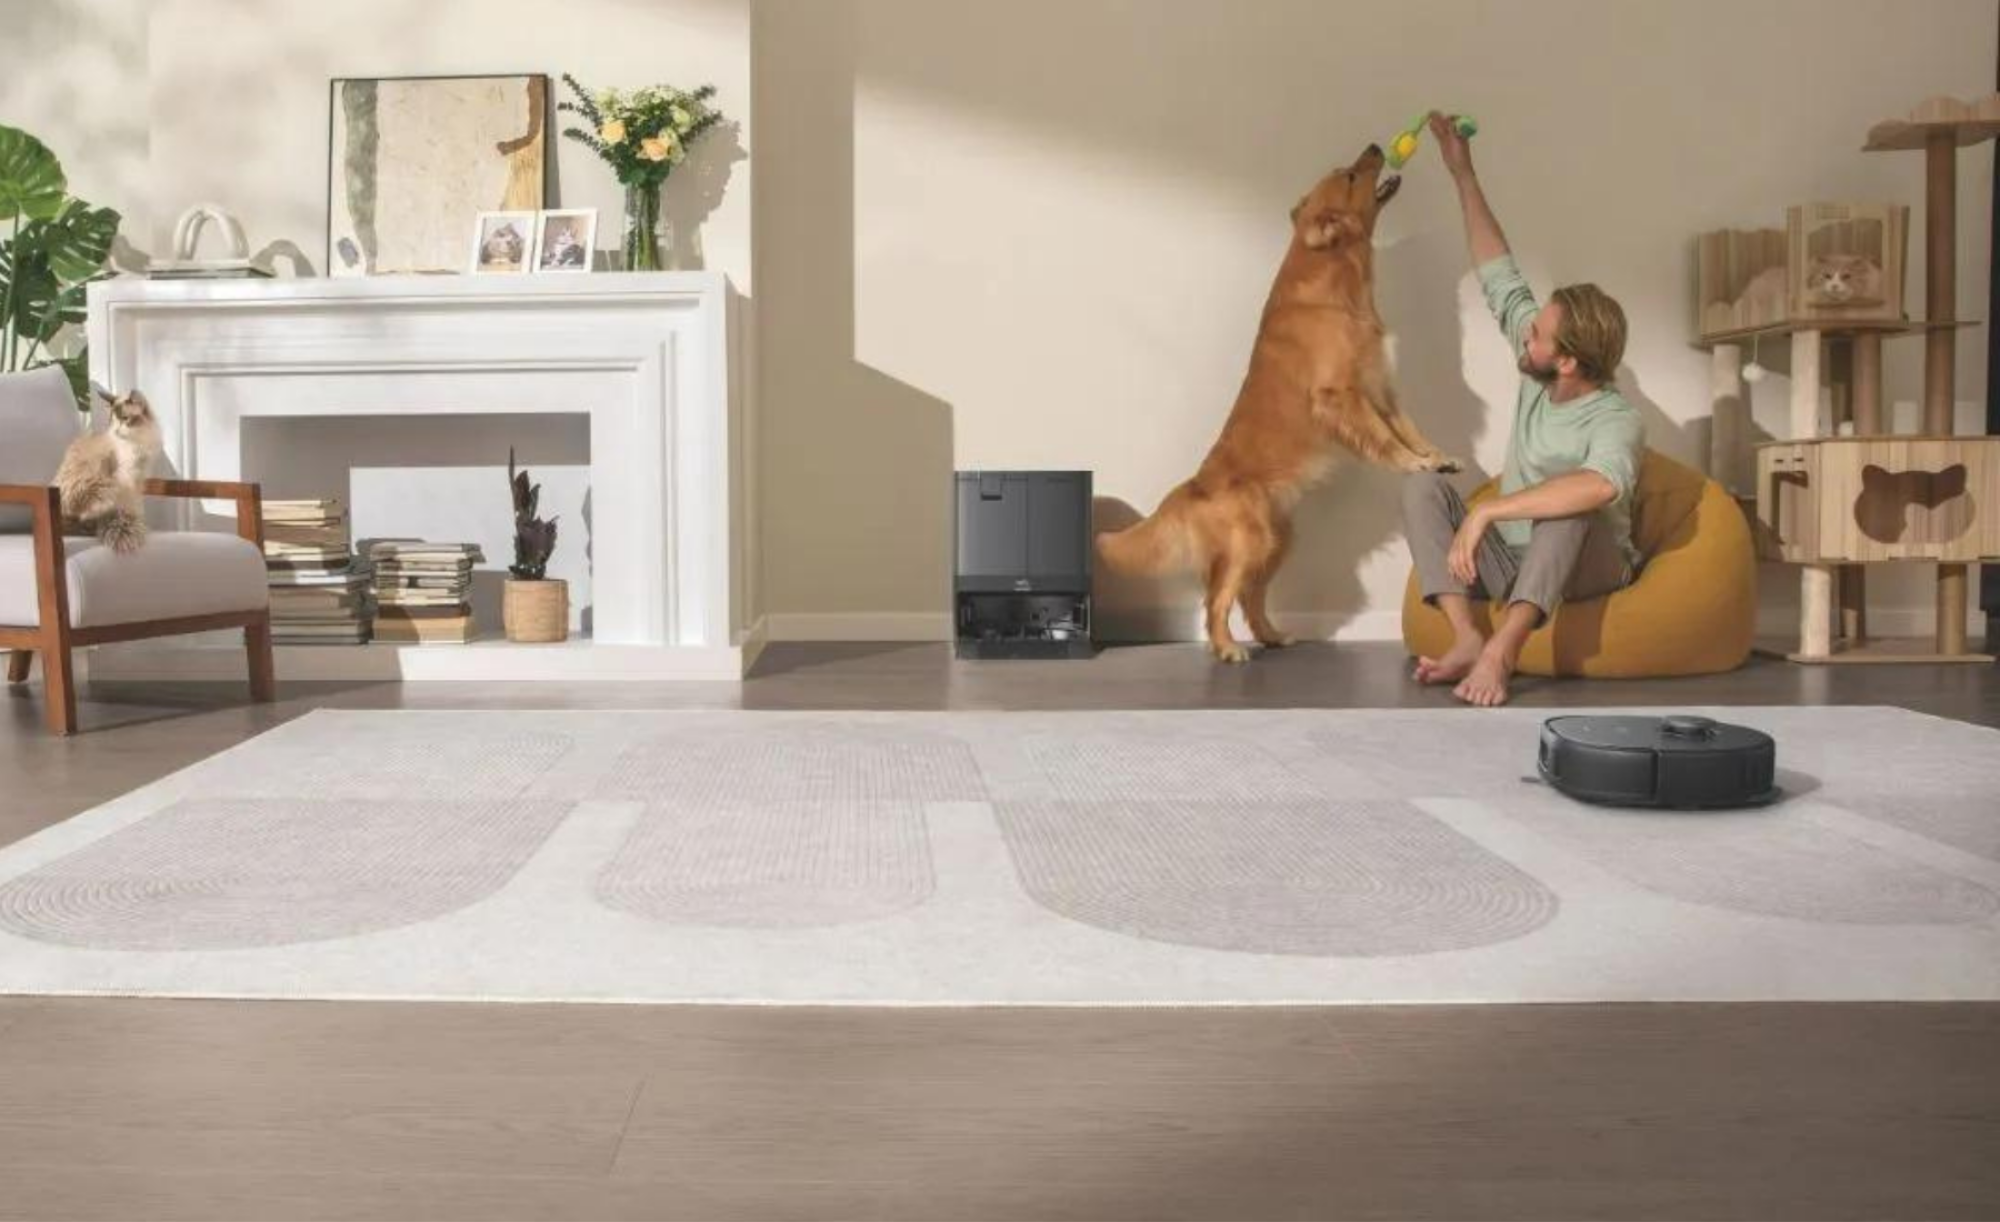 Eufy robot vacuum cleaning rug with person, dog, and cat in background